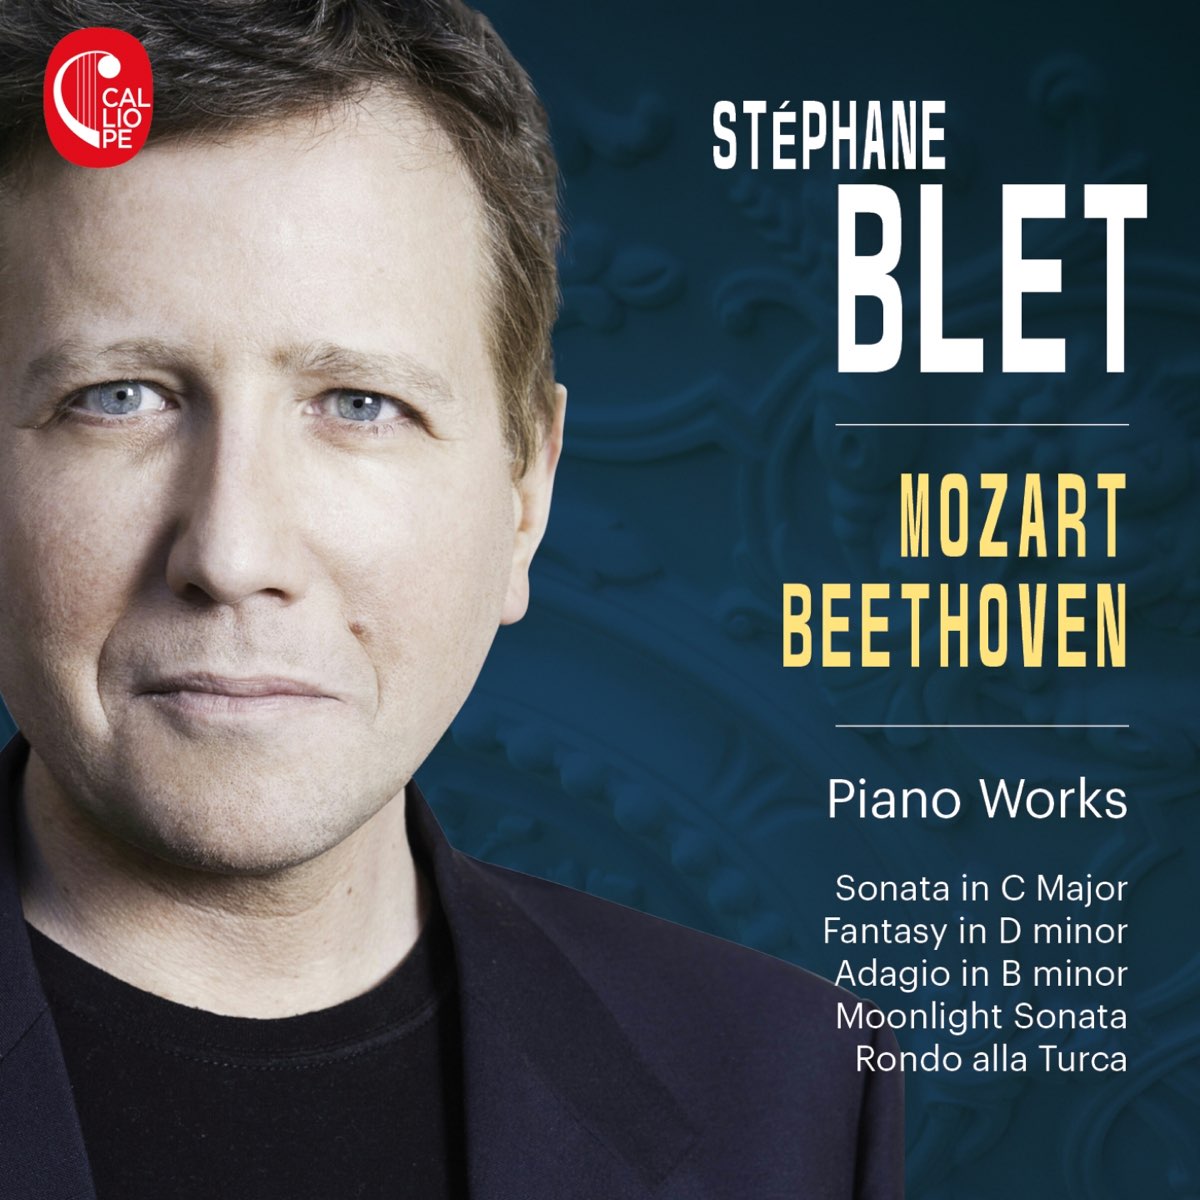 Mozart, Beethoven: Piano Works by Stephane Blet on Apple Music